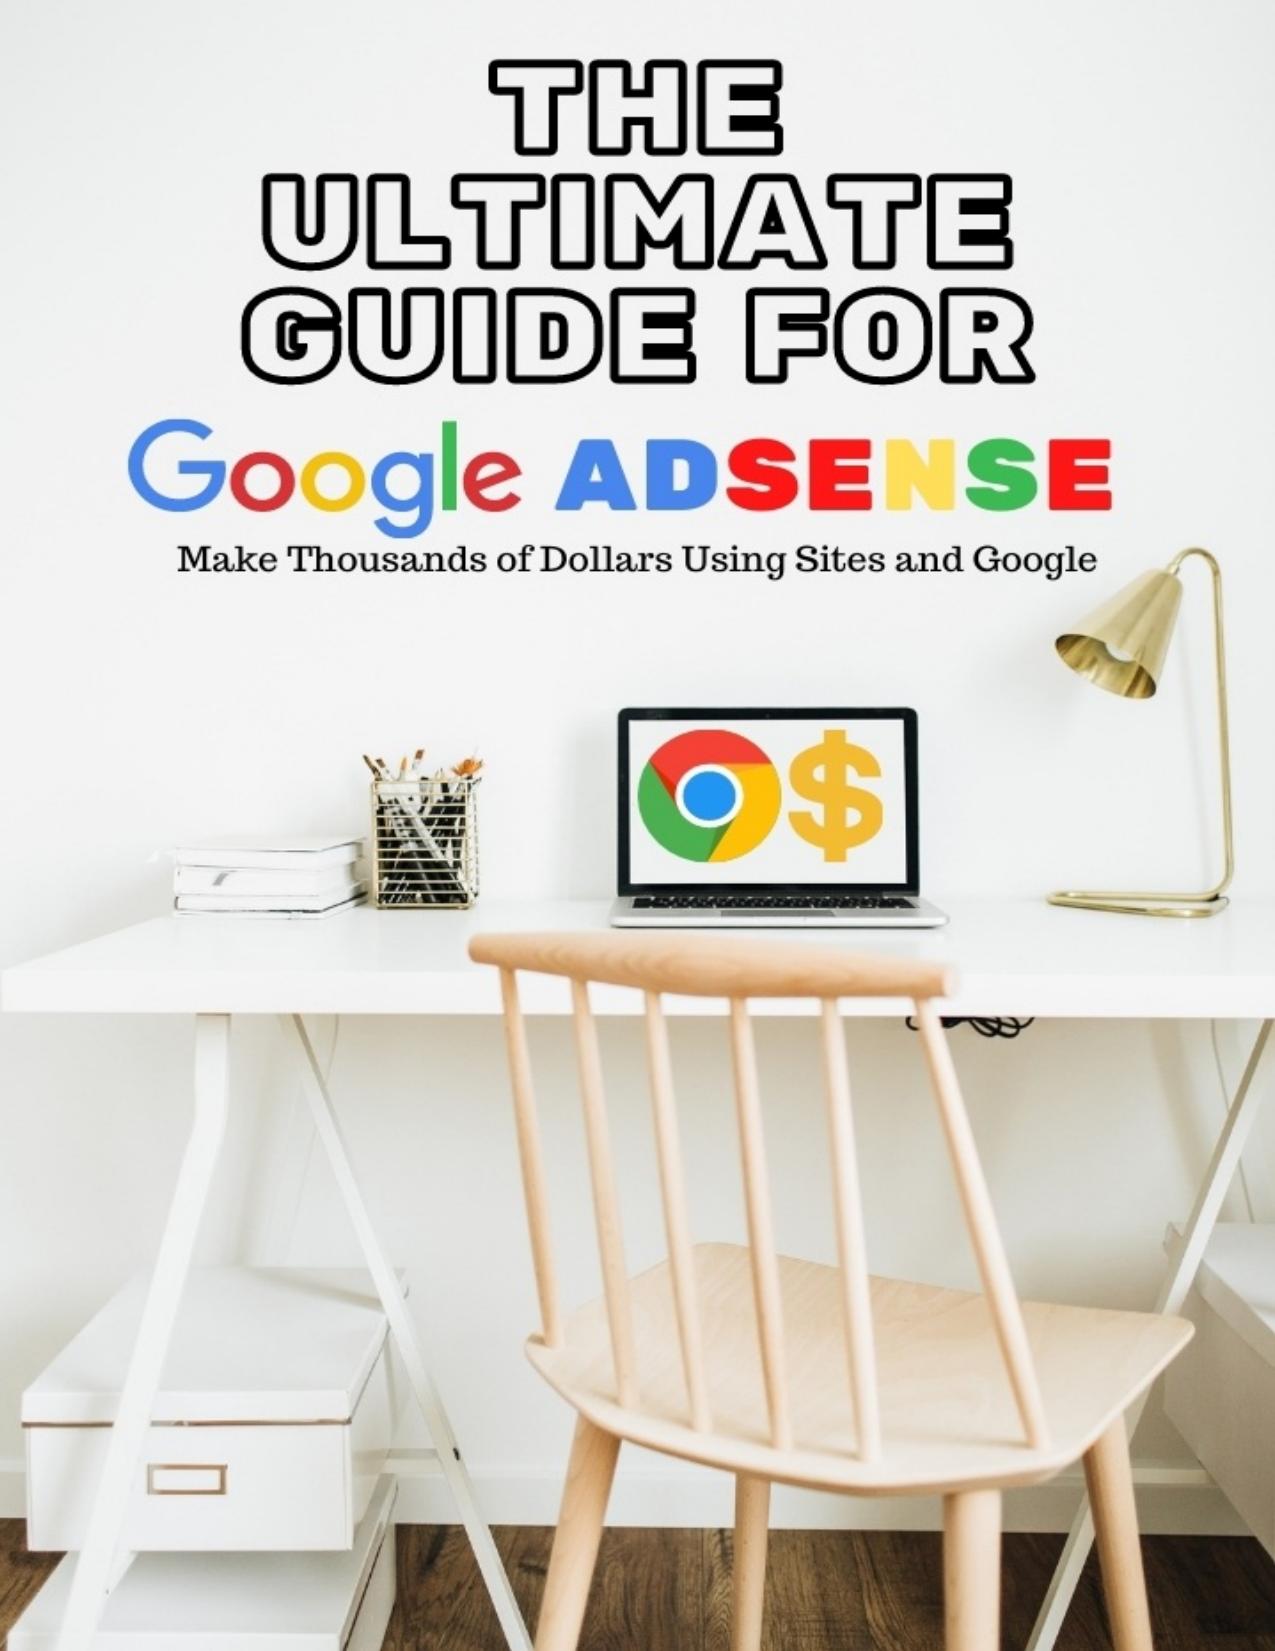 The Ultimate Guide for Google Adsense: Make Thousands of Dollars Using Sites and Google by Souza Renan